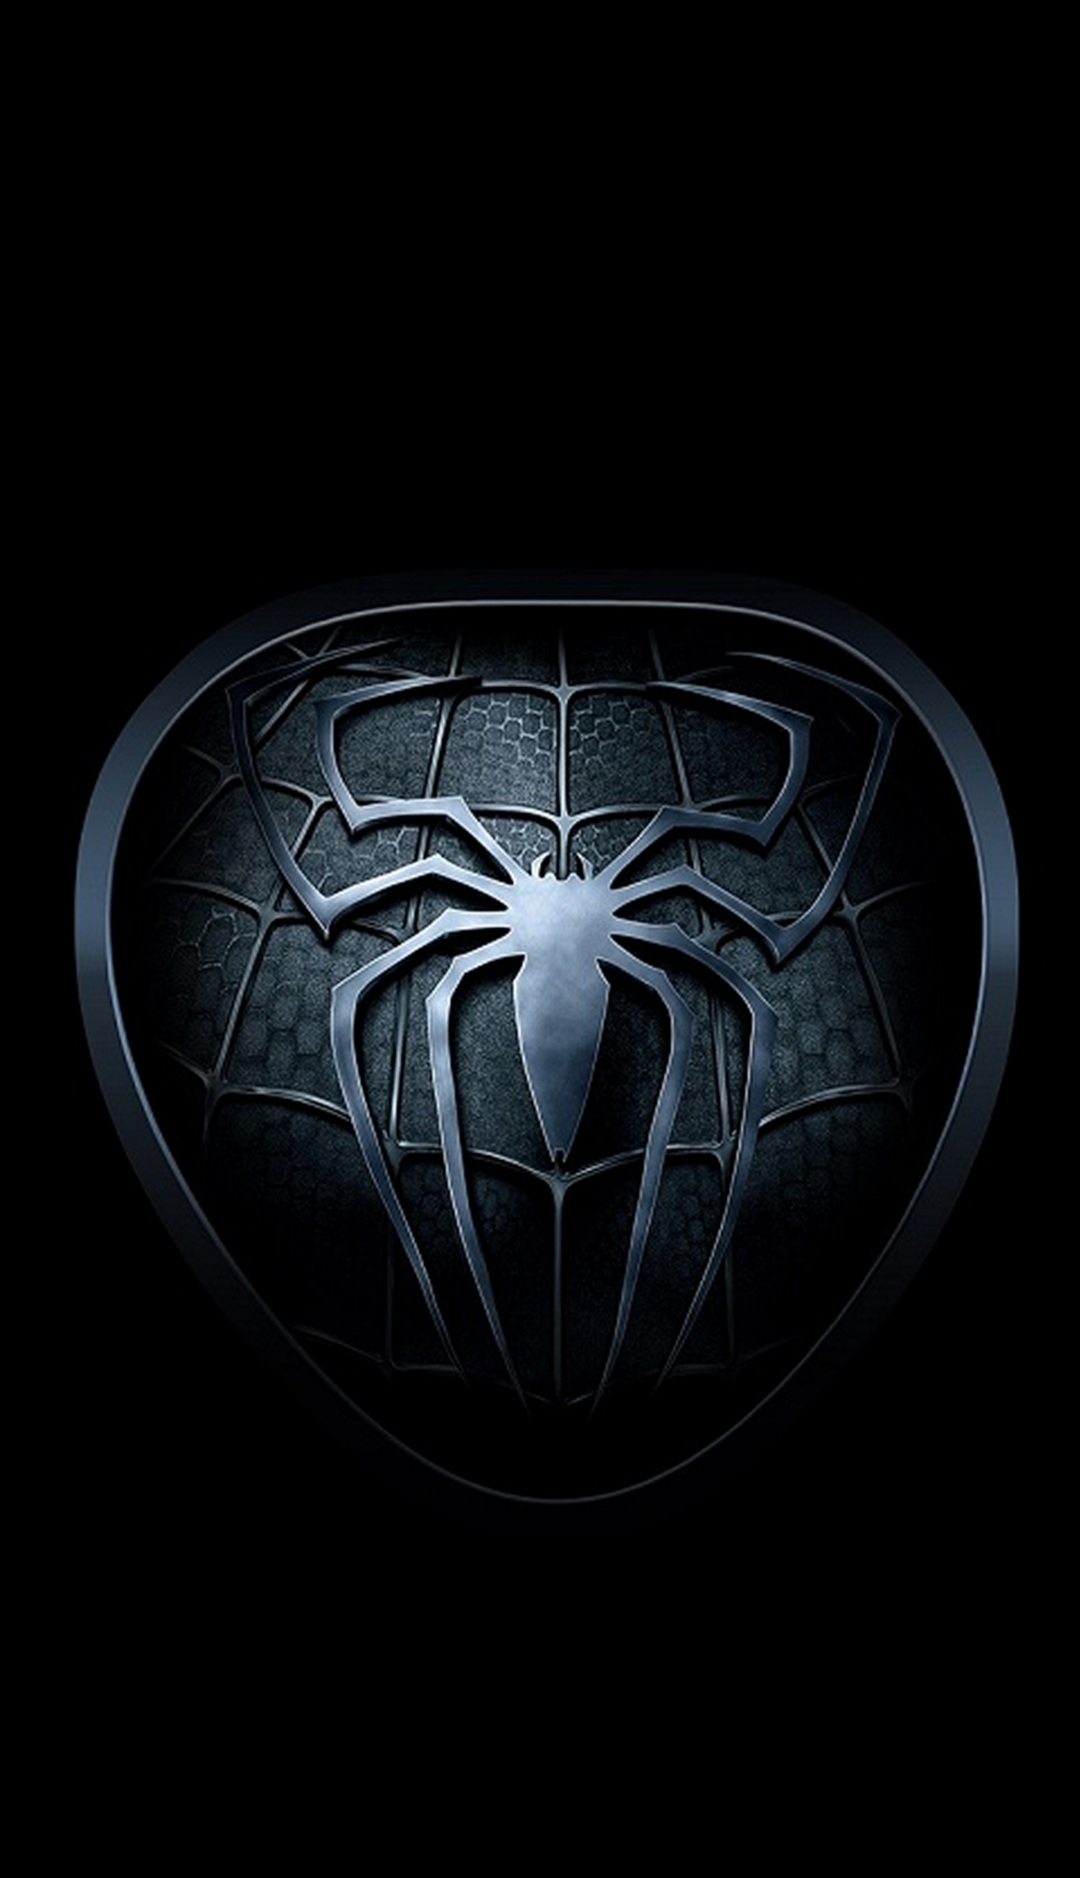 12 Hd Wallpapers For Andro - Spiderman Black Suit Wallpaper Hd - 1080x1878  Wallpaper 